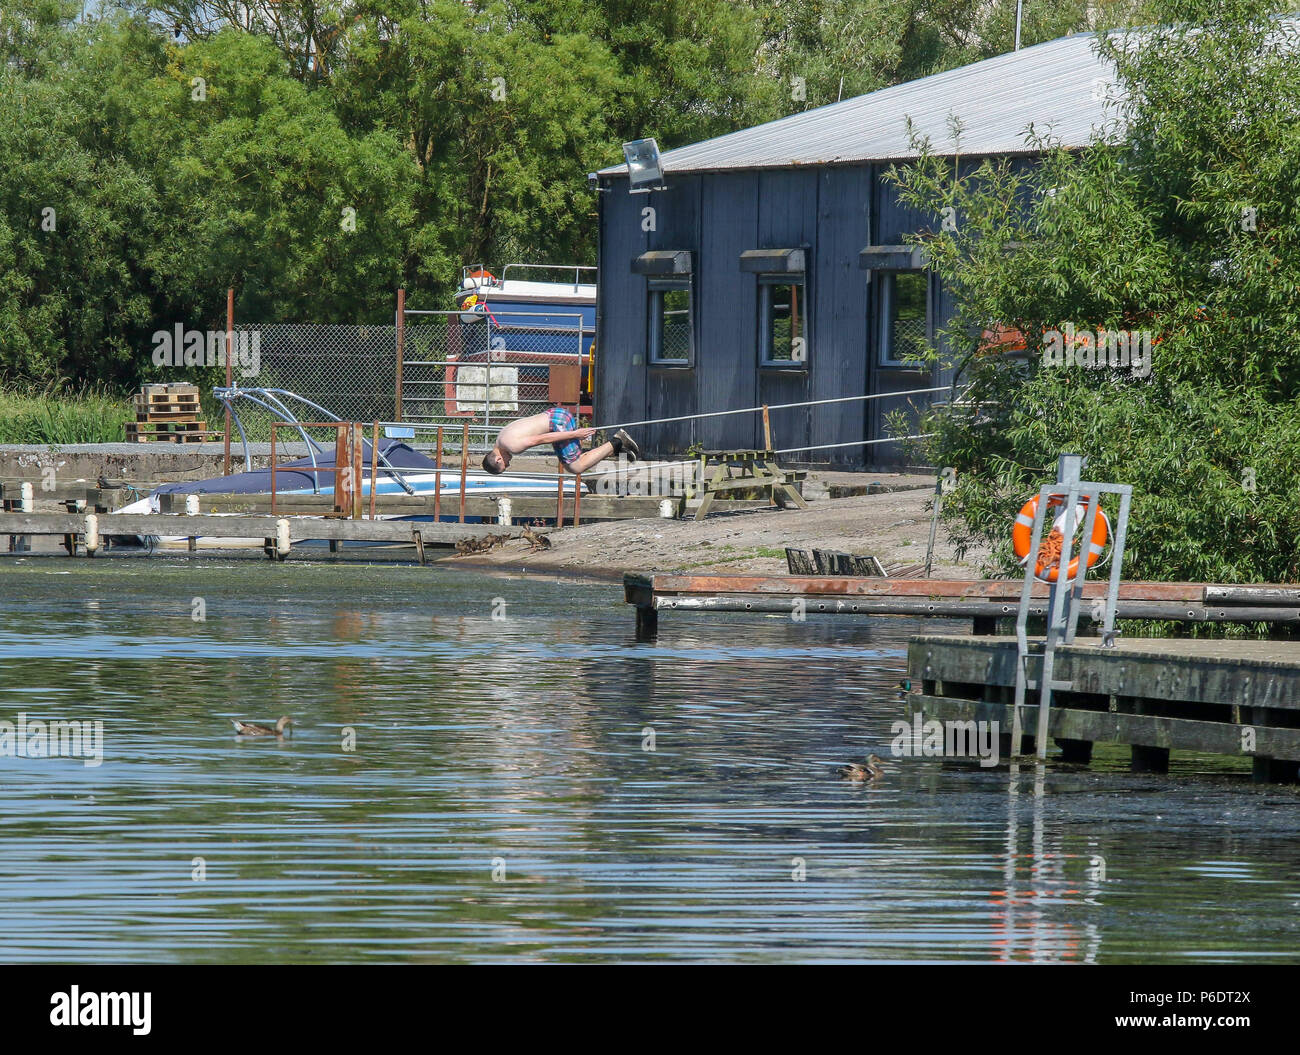 Lough Neagh, Northern Ireland. 29 June 2018. UK weather - another glorious summer day as the heatwave continues. Lough Neagh is the UK's largest freshwater lake and with weather like this it's a great place to enjoy the best summer in decades. A young man diving into the water at Kinnego marina. Credit: David Hunter/Alamy Live News. Stock Photo